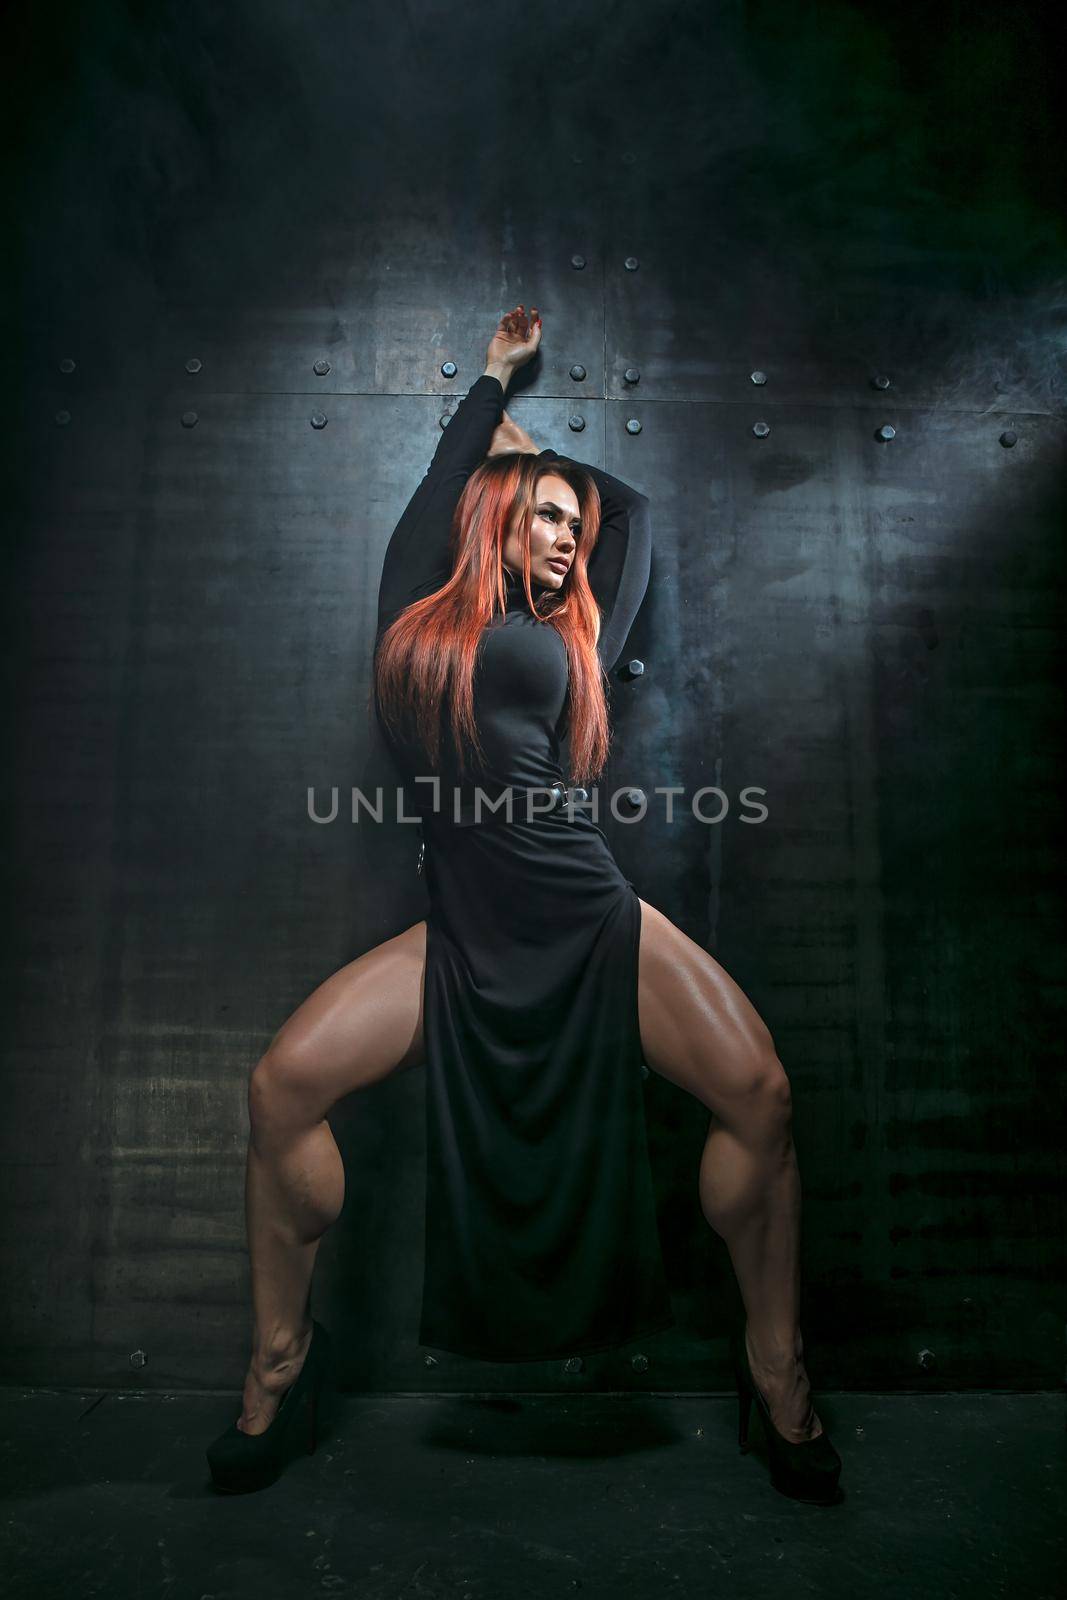 Graceful red-haired girl in black dress with high heels in the studio on metallic background